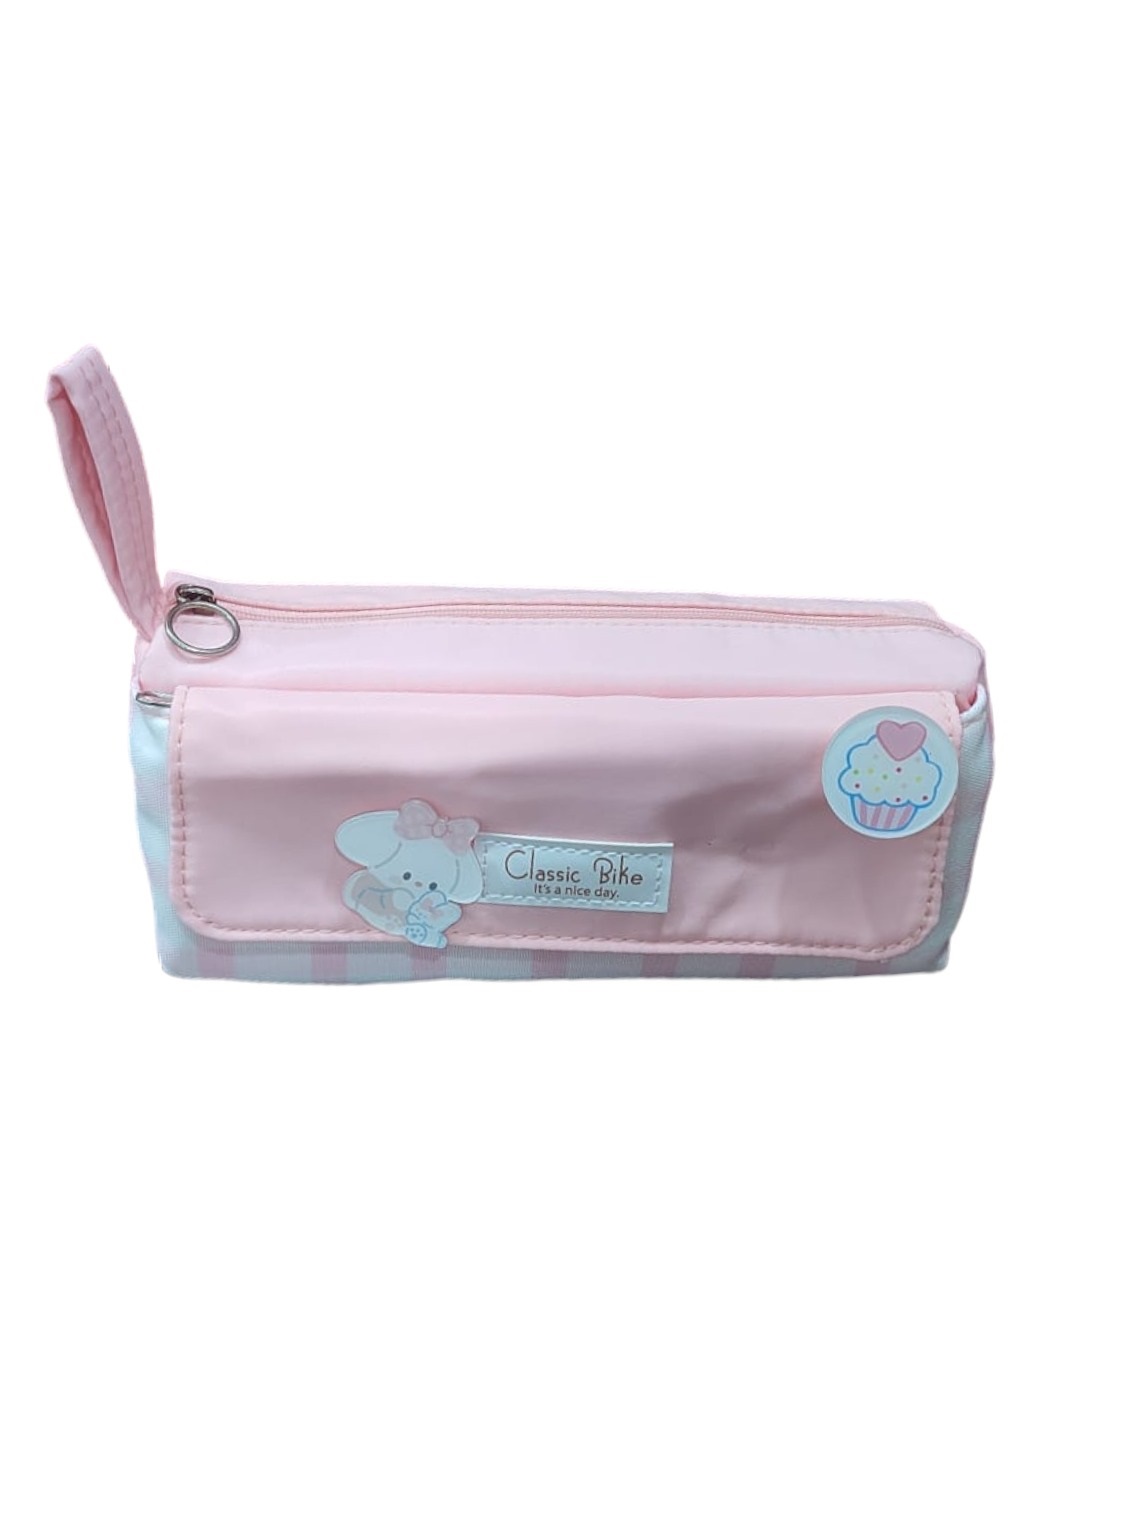 Pencil Pen Case, Large Capacity Zipper Pencil Pouch, Aesthetic Pencil Bag  Cute School Supplies for Girls (PACK OF 1) Buy Online